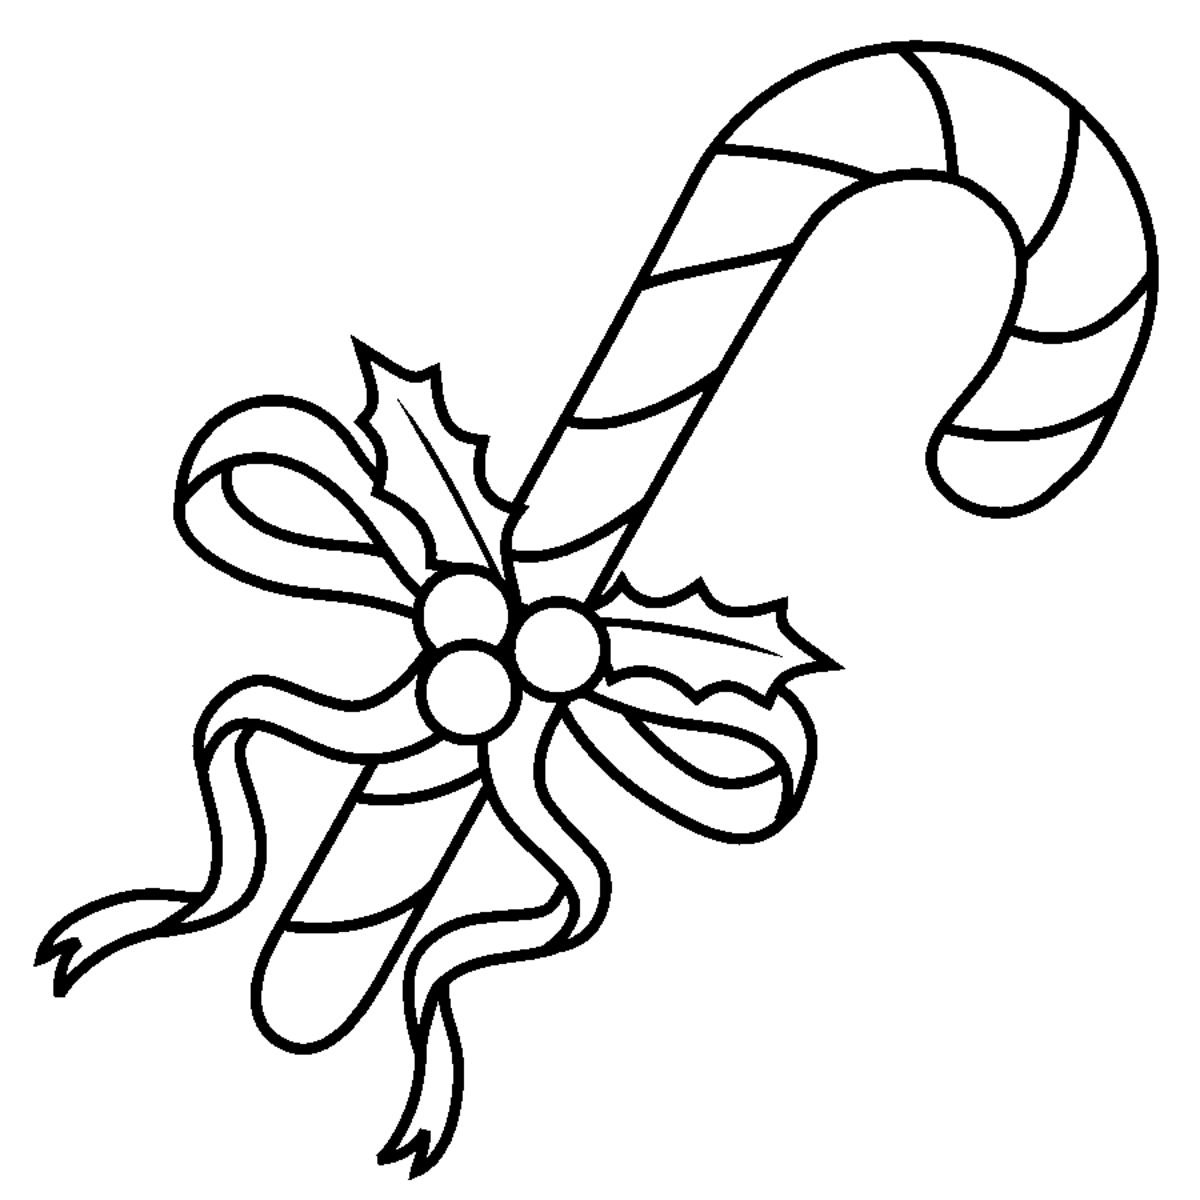 Candy Cane Coloring Page Free Printable Coloring Pages